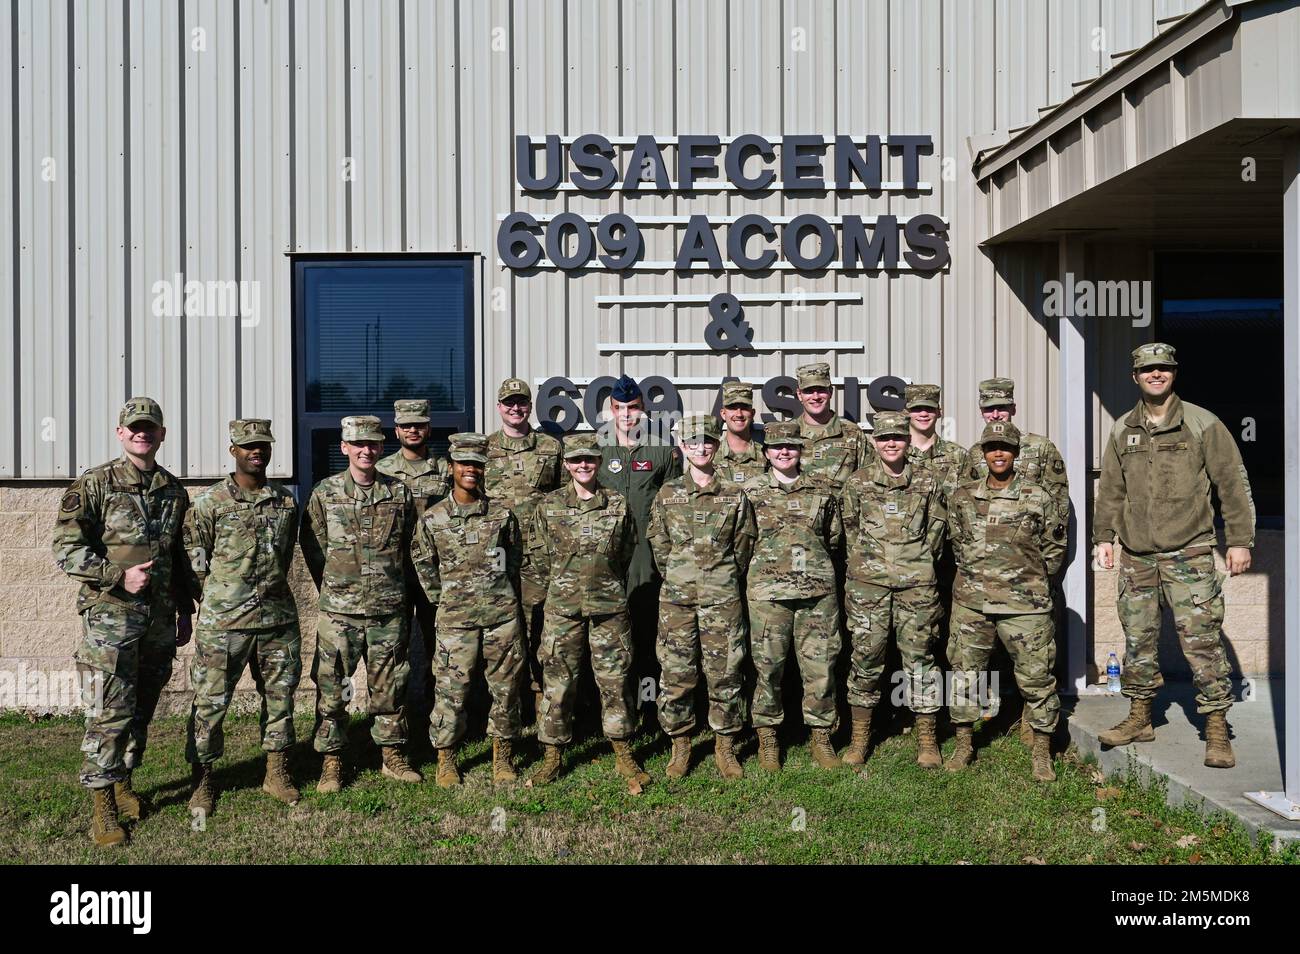 Cadets from Air Force Reserve Officer Training Corps Detachment 775 pose for a group photo during a 609th Air Communications Squadron immersion tour at Shaw Air Force Base, South Carolina, March 25, 2022. The cadets learned about the 609th ACOMS mission while getting one-on-one time with senior leaders within the squadron. Stock Photo